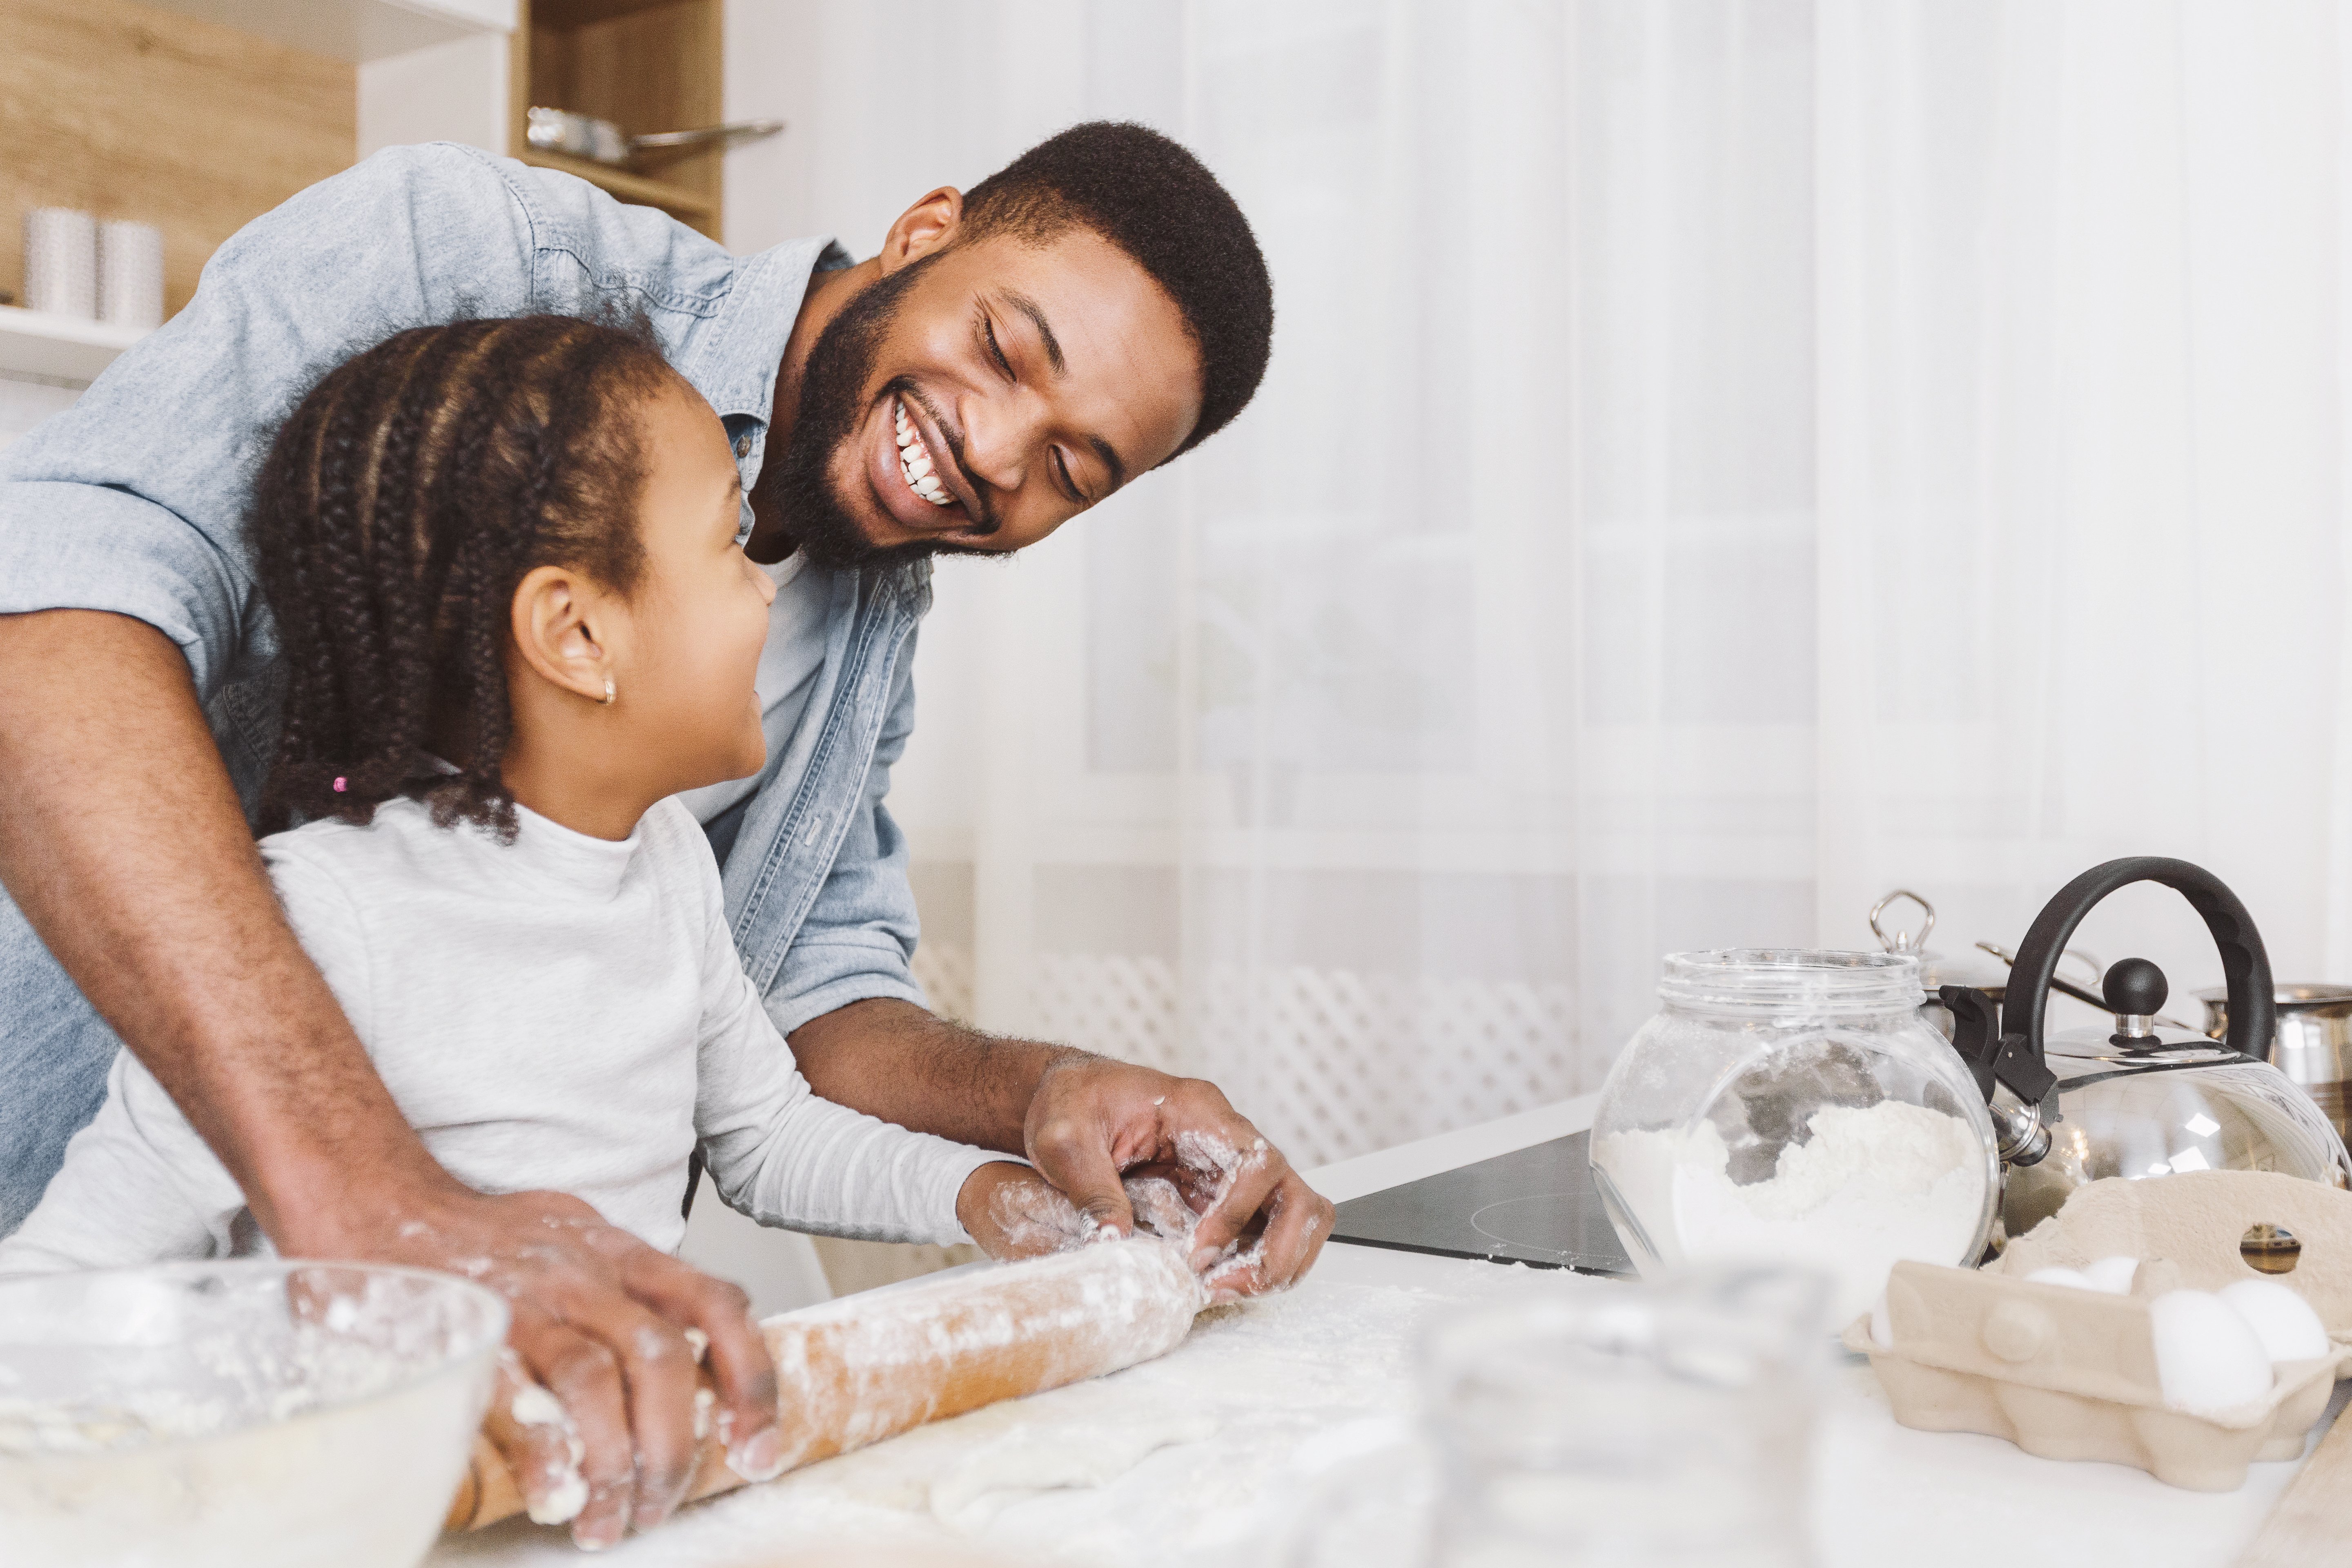 baking-family-father-and-daughter-bake-in-kitchen-together